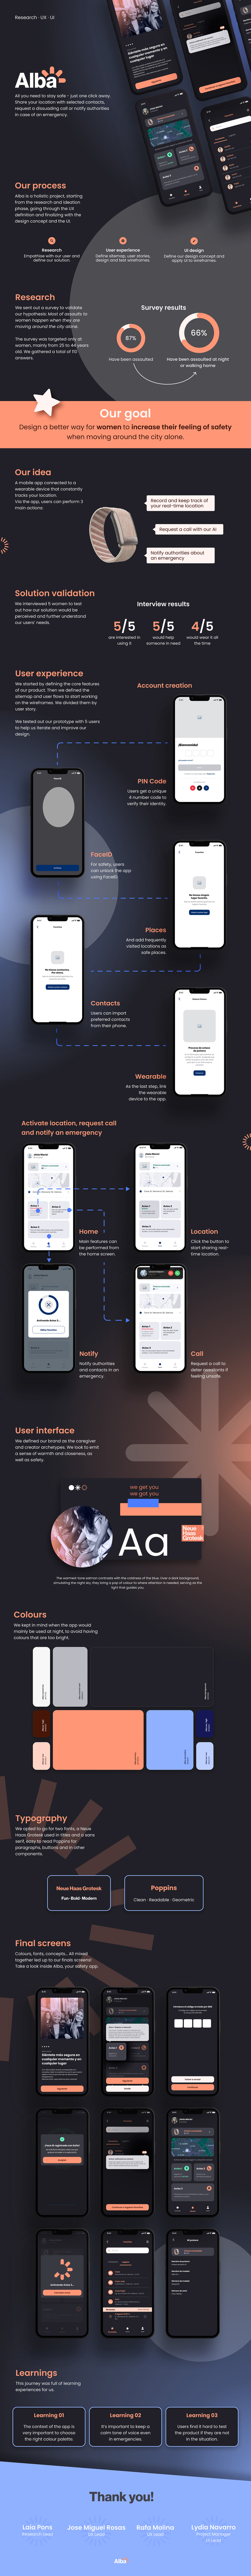 uxdesign uidesign research project design thinking final project Case Study Figma Mobile app design